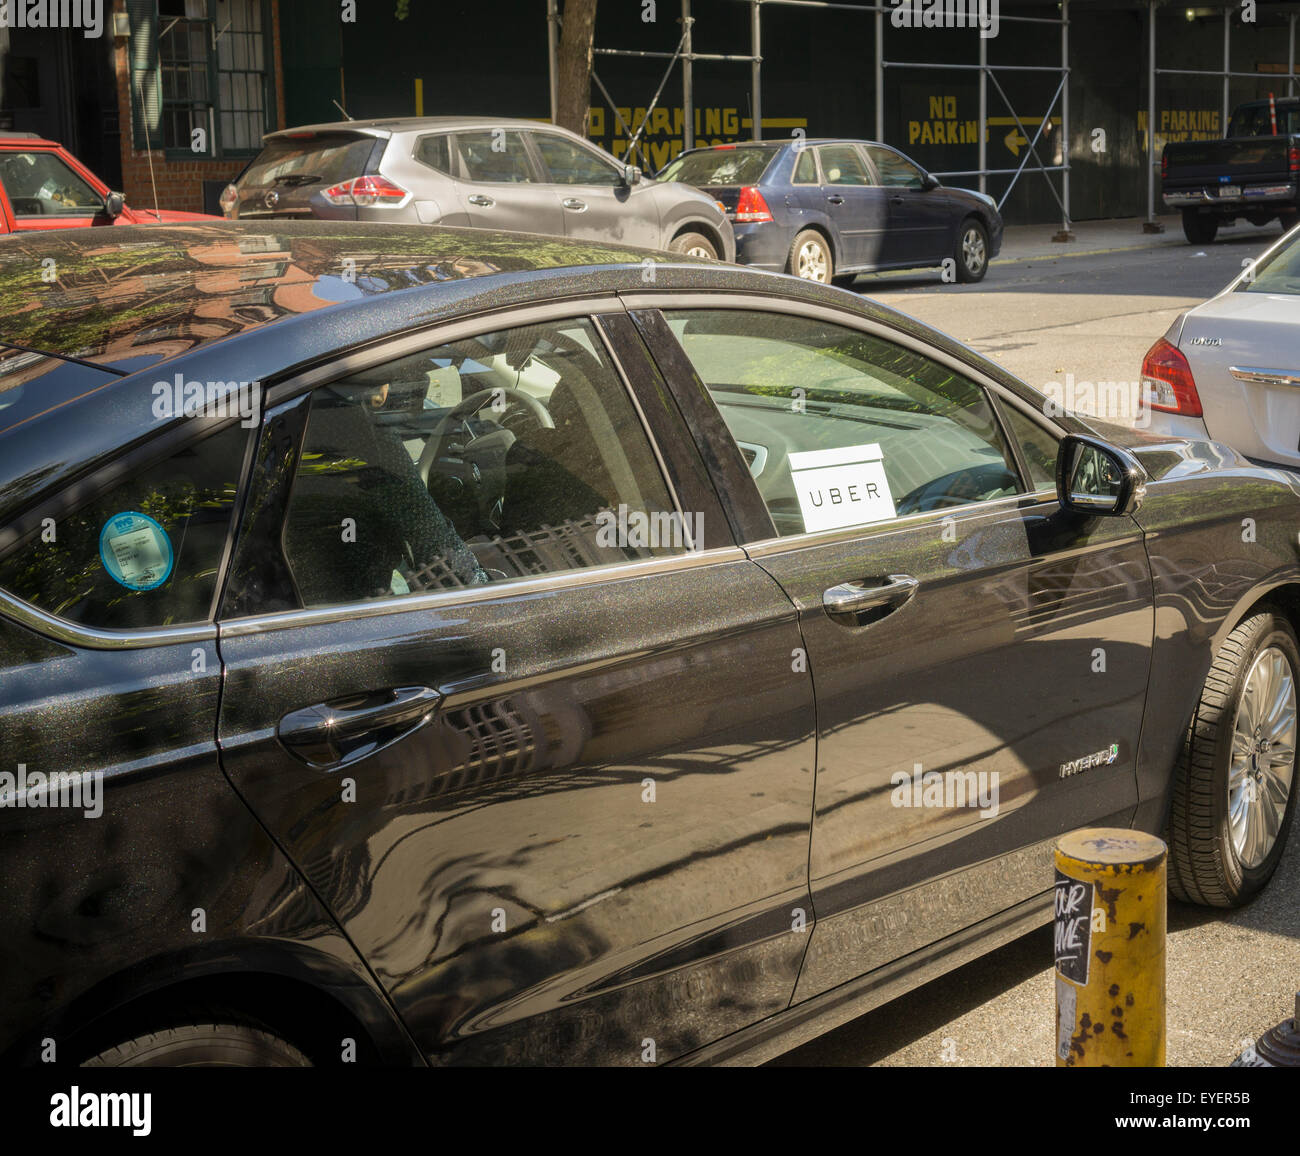 An Uber livery waits for their passenger in Greenwich Village in New York on Wednesday, July 22, 2015. The New York City Council vote on capping the amount of Uber livery cars has been postponed after an agreement was made for Uber to supply more information and data.  (© Richard B. Levine) Stock Photo